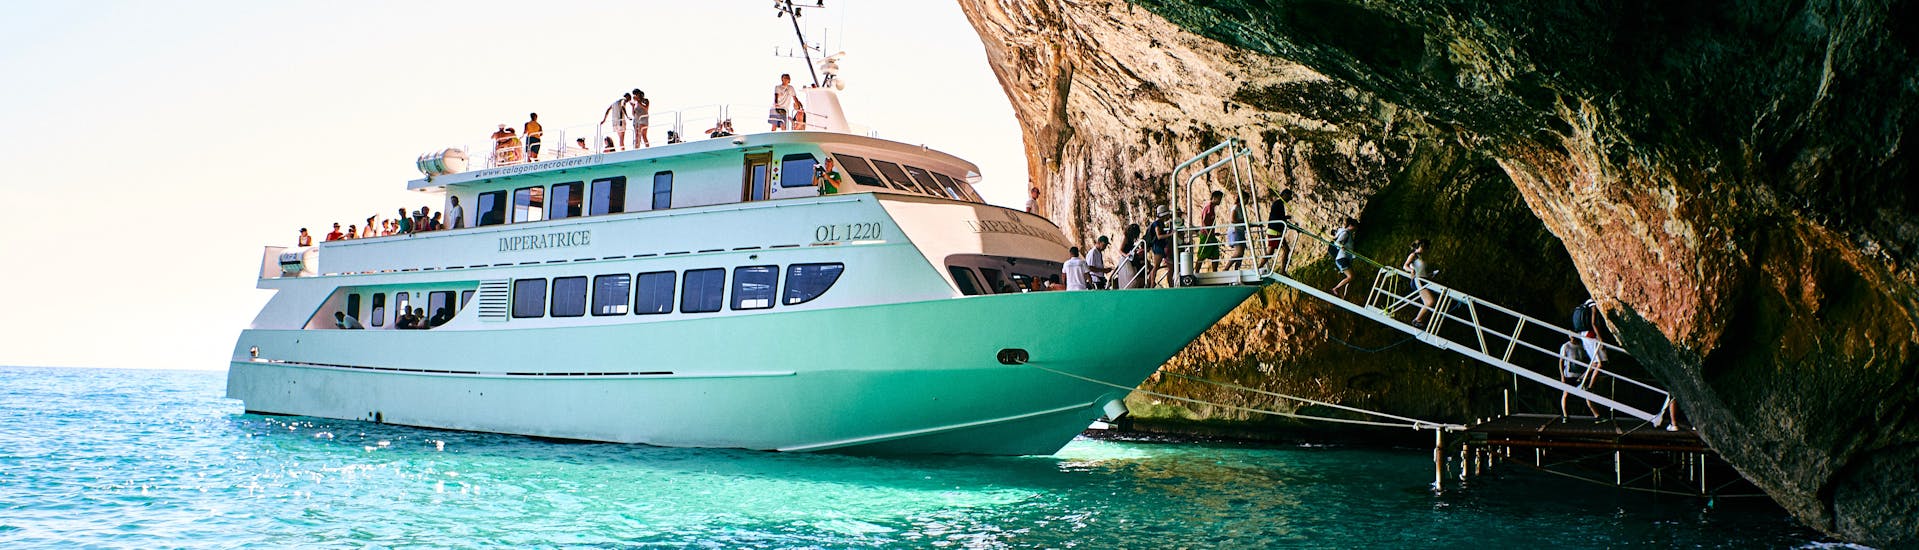 The motorboat used by Nuovo Consorzio Trasporti Marittimi is disembarking at Grotta del Fico during the Day Boat Trip from La Caletta to the Gulf of Orosei with Swimming Stops.